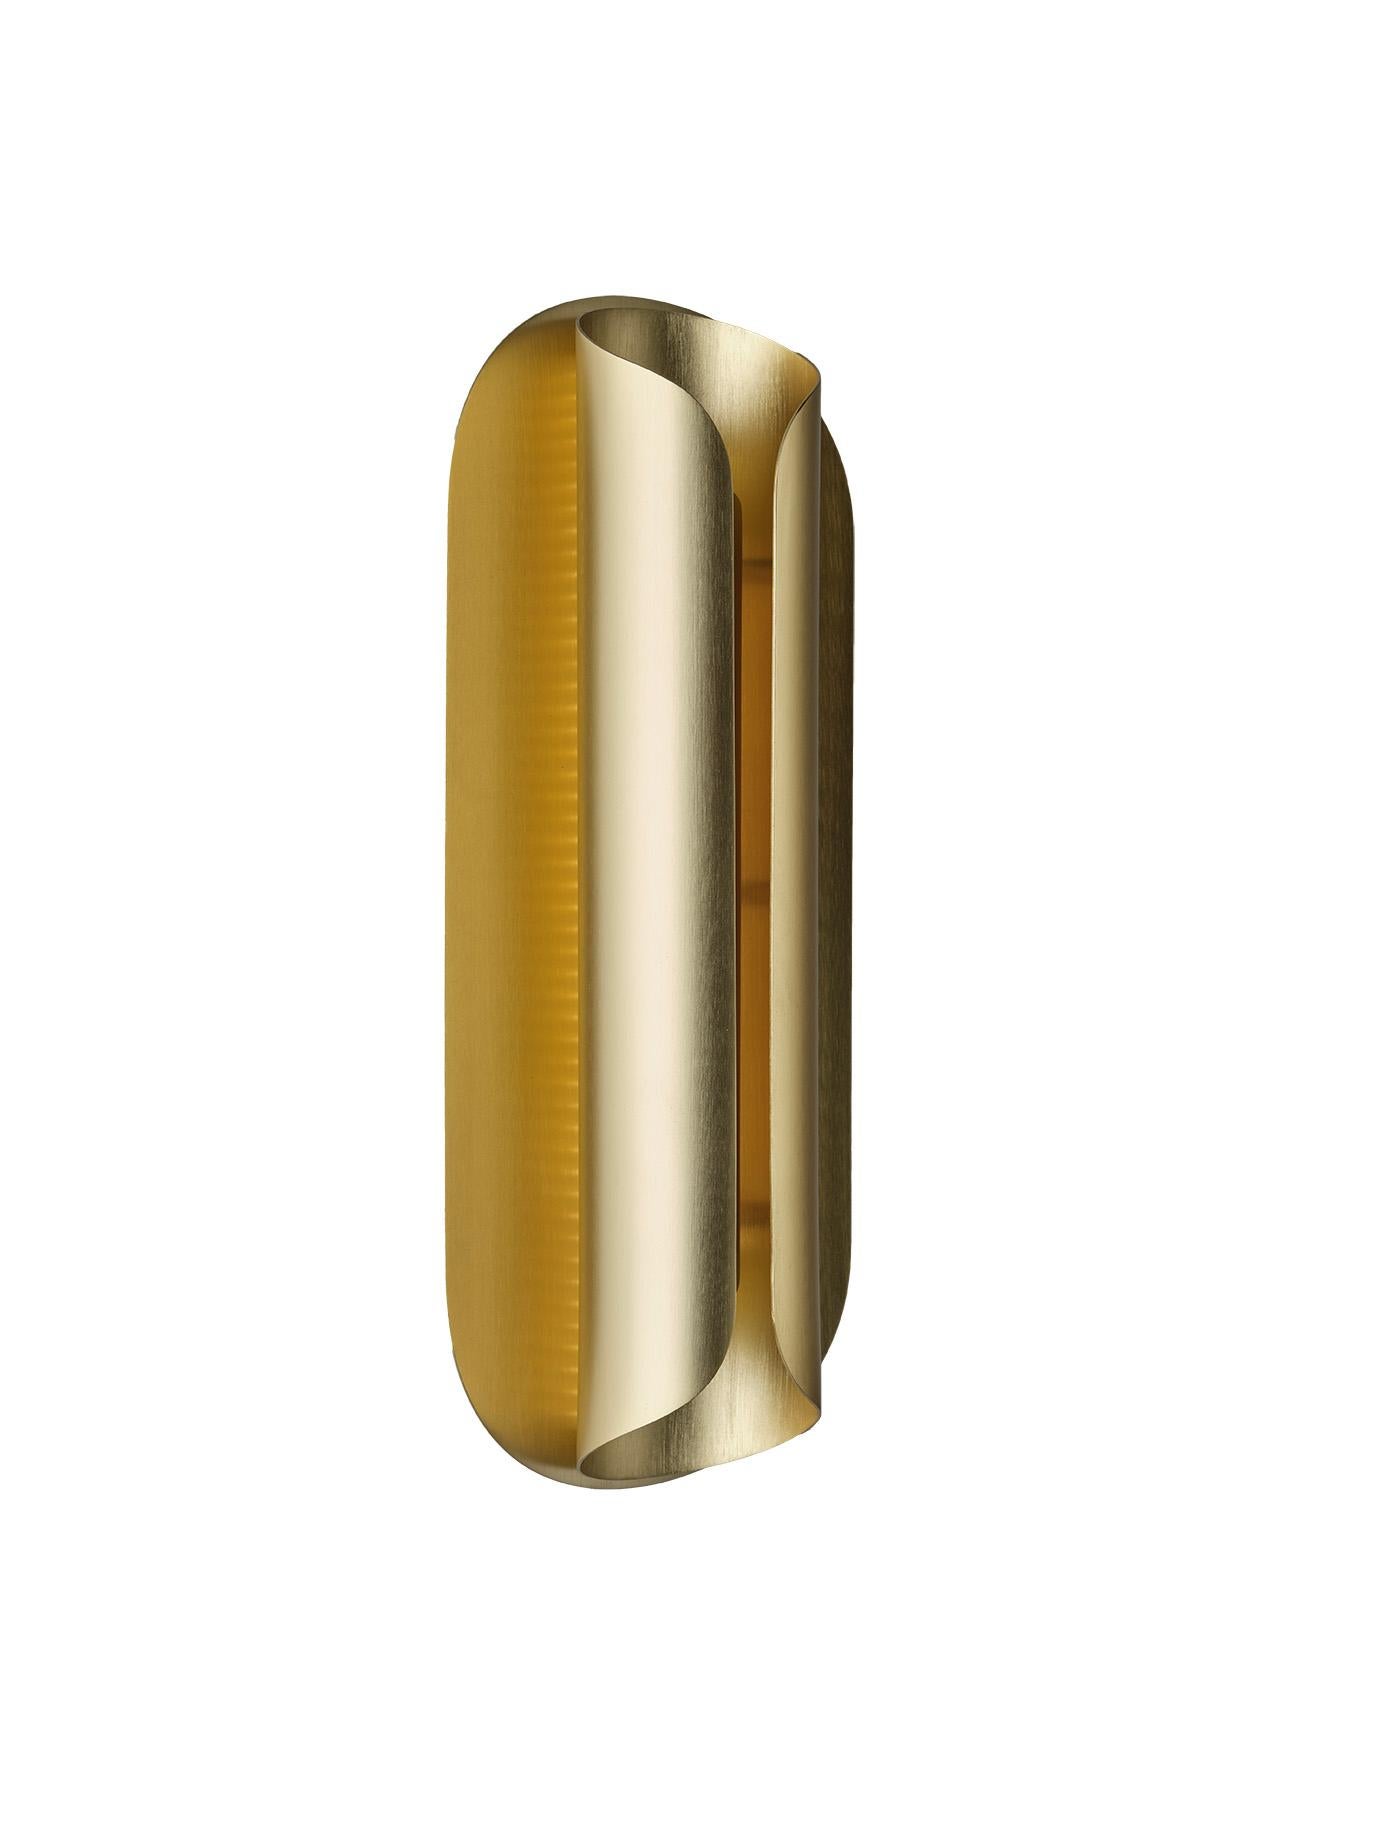 DCW Editions Rosalie Wall Lamp in Gold Aluminium by Julie Fuillet
 
 Across the globe, light evolves over time.
 From the soft and reassuring light of the candle to the raw LED brightness of the refrigerator light, centuries have passed.
 Are we at